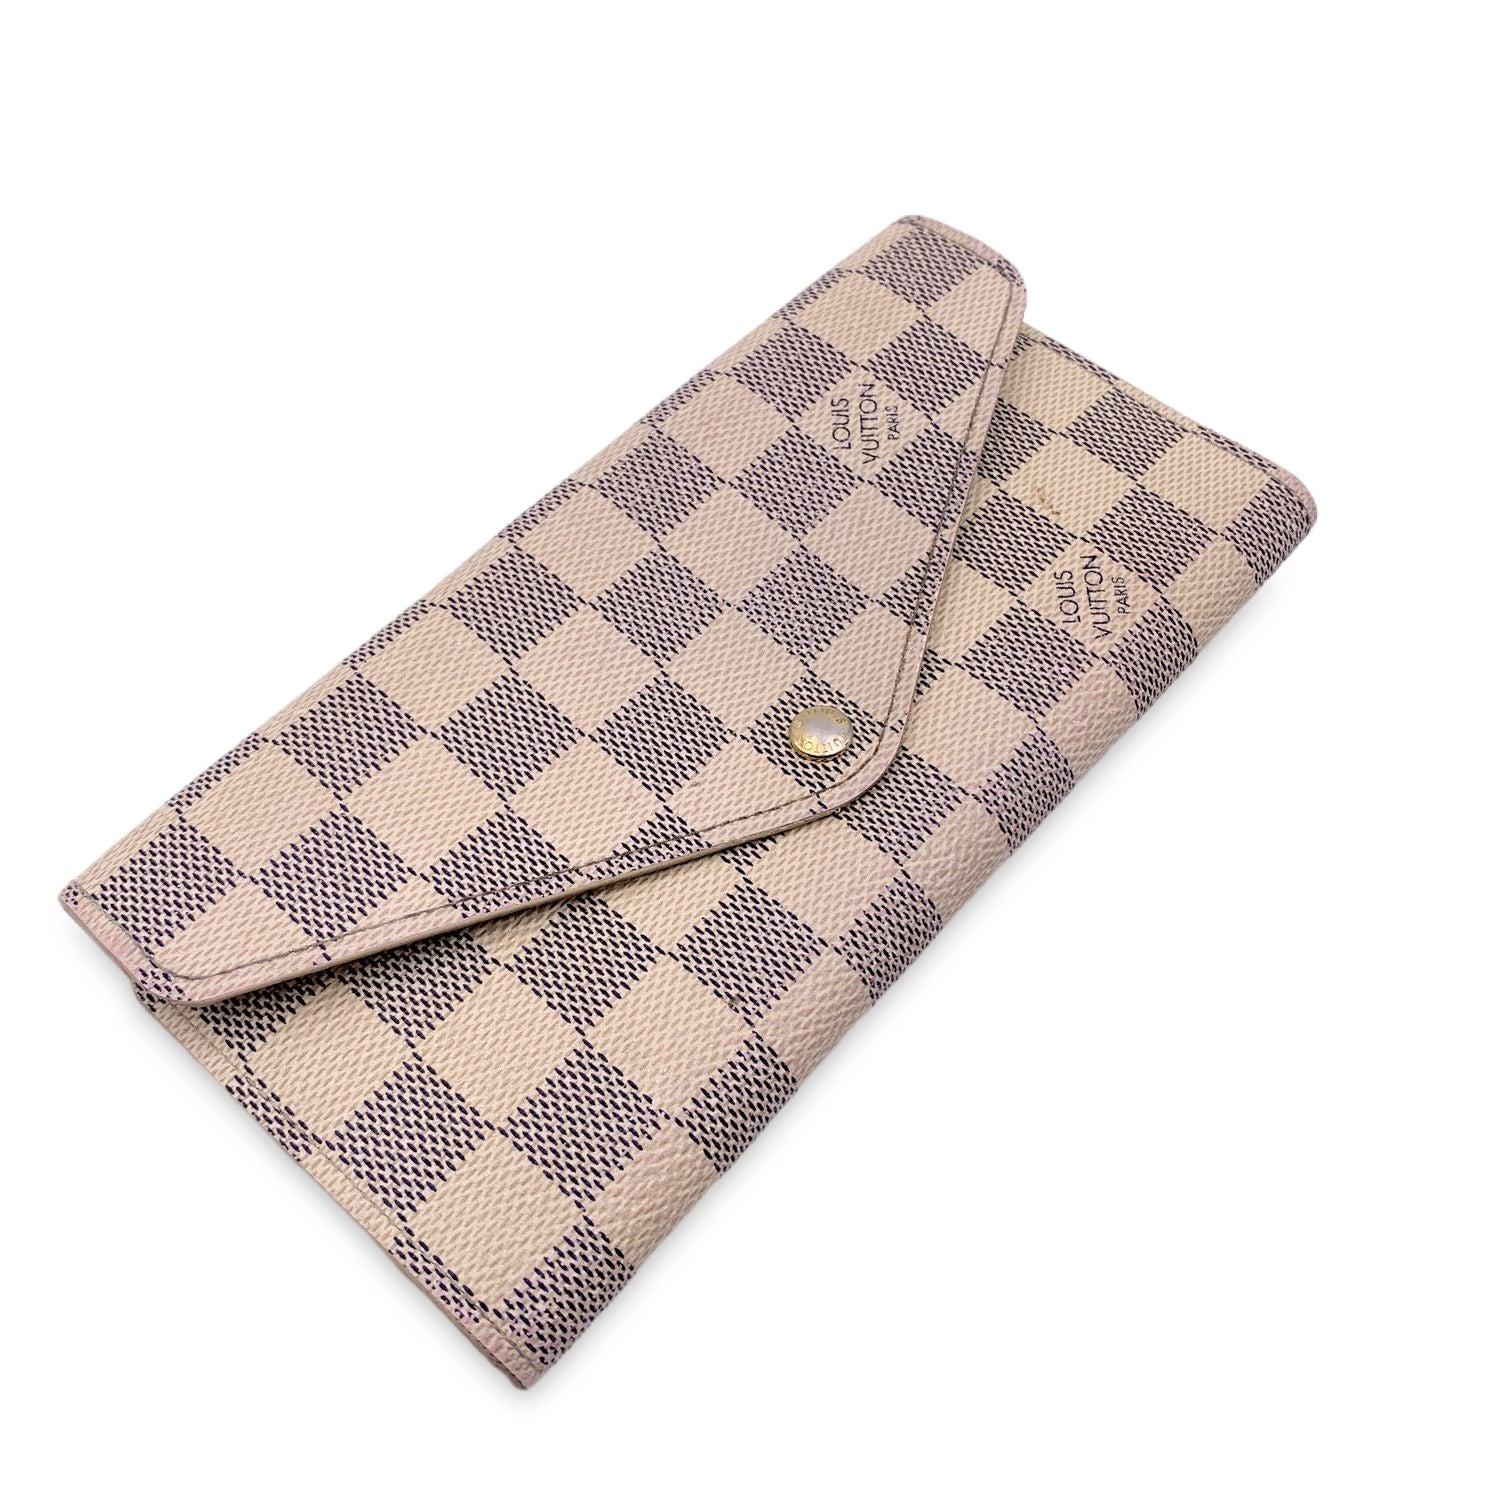 This beautiful Bag will come with a Certificate of Authenticity provided by Entrupy. The certificate will be provided at no further cost. Louis Vuitton long Damier Azur wallet. Mod. Josephine. Flap with button closure. The flap opens to an interior